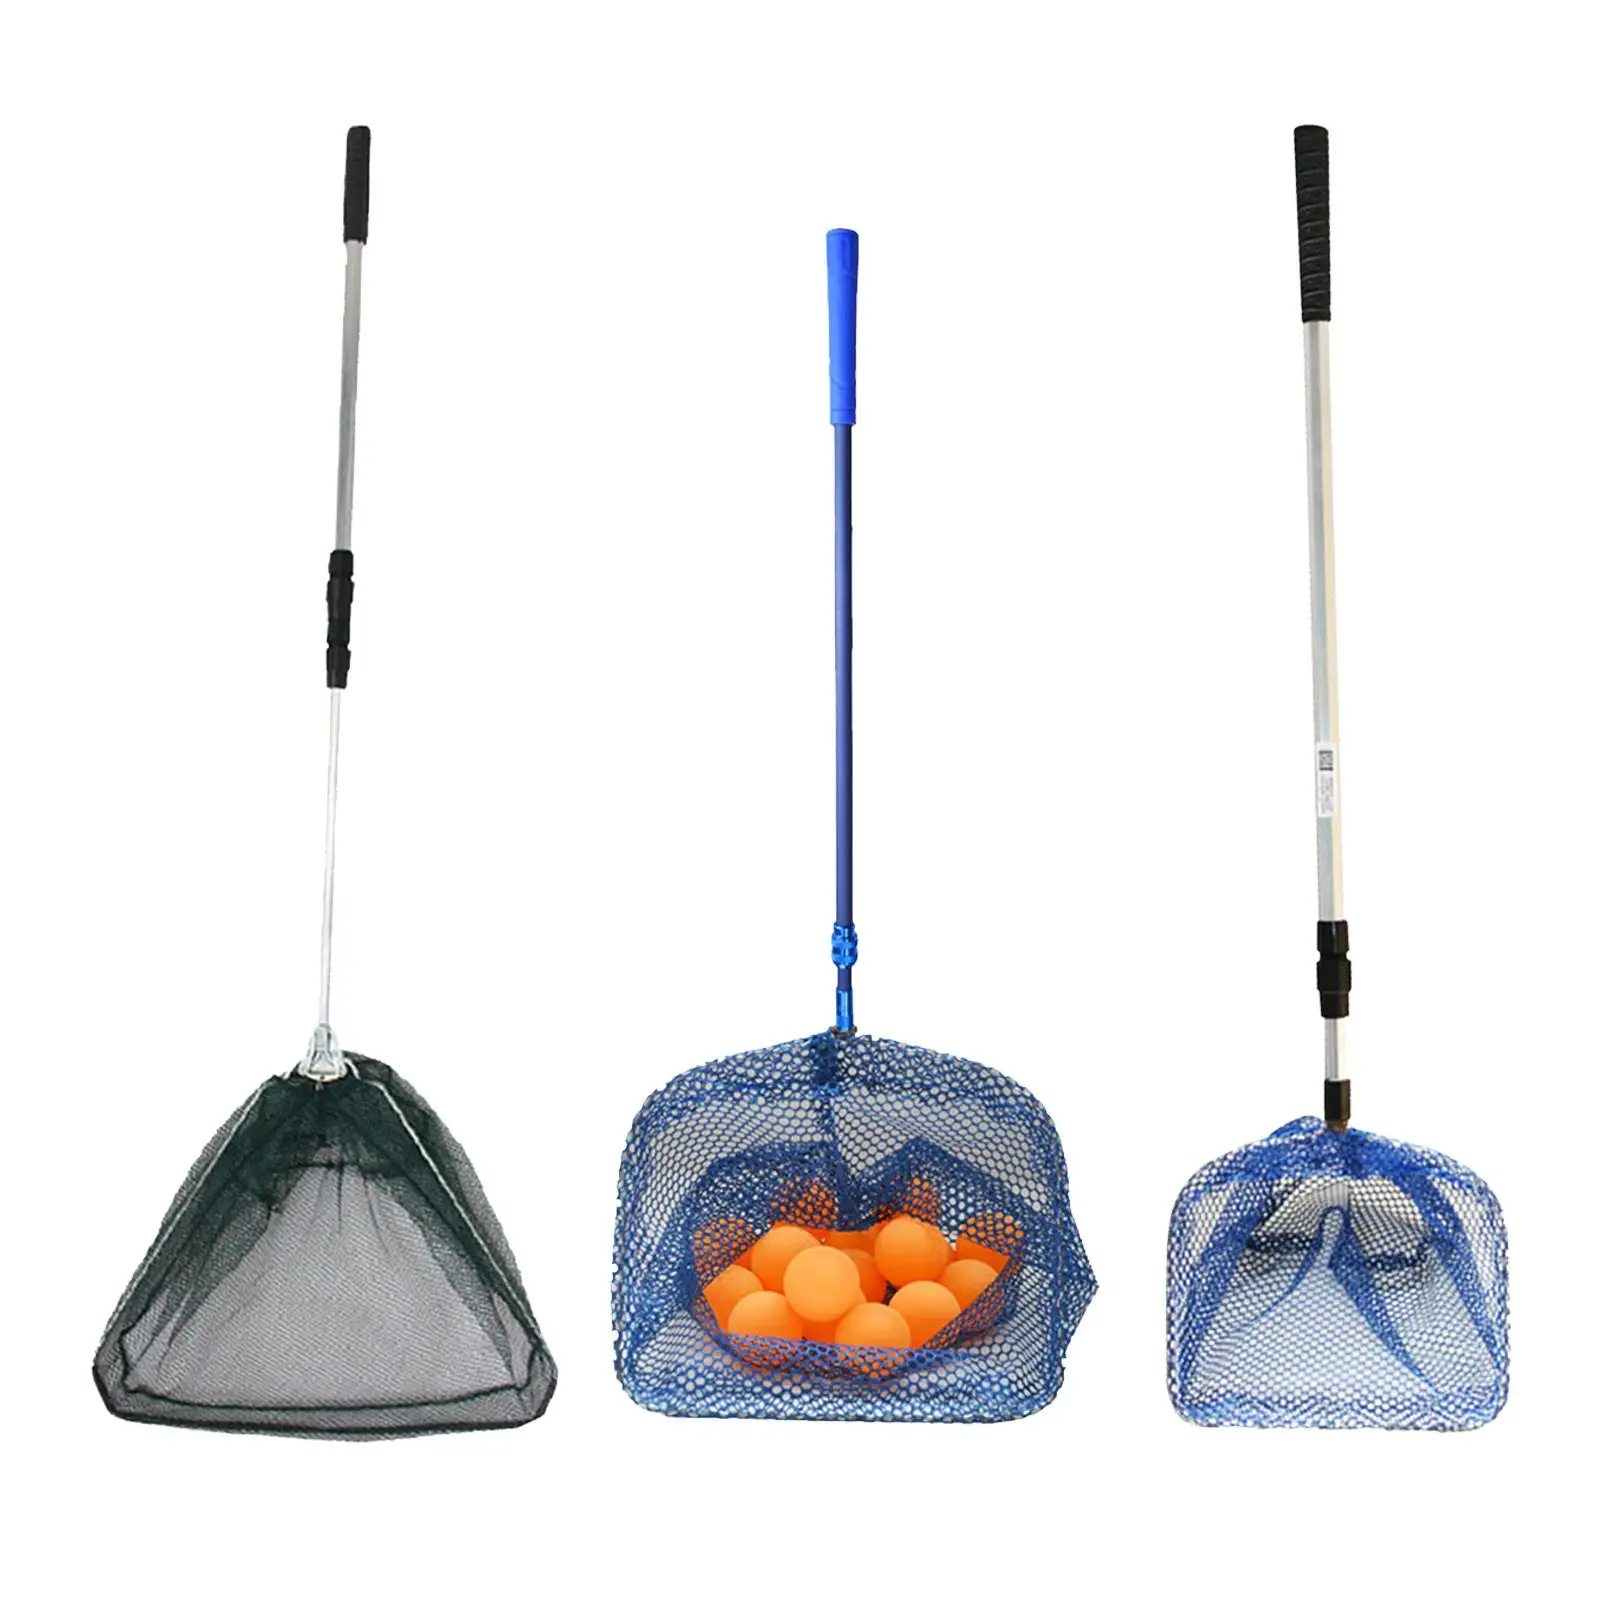 Pinger Pinggong Picker Telescopic Accessory Net Pickup Collector Bag Collectible Net for Collecting Ball